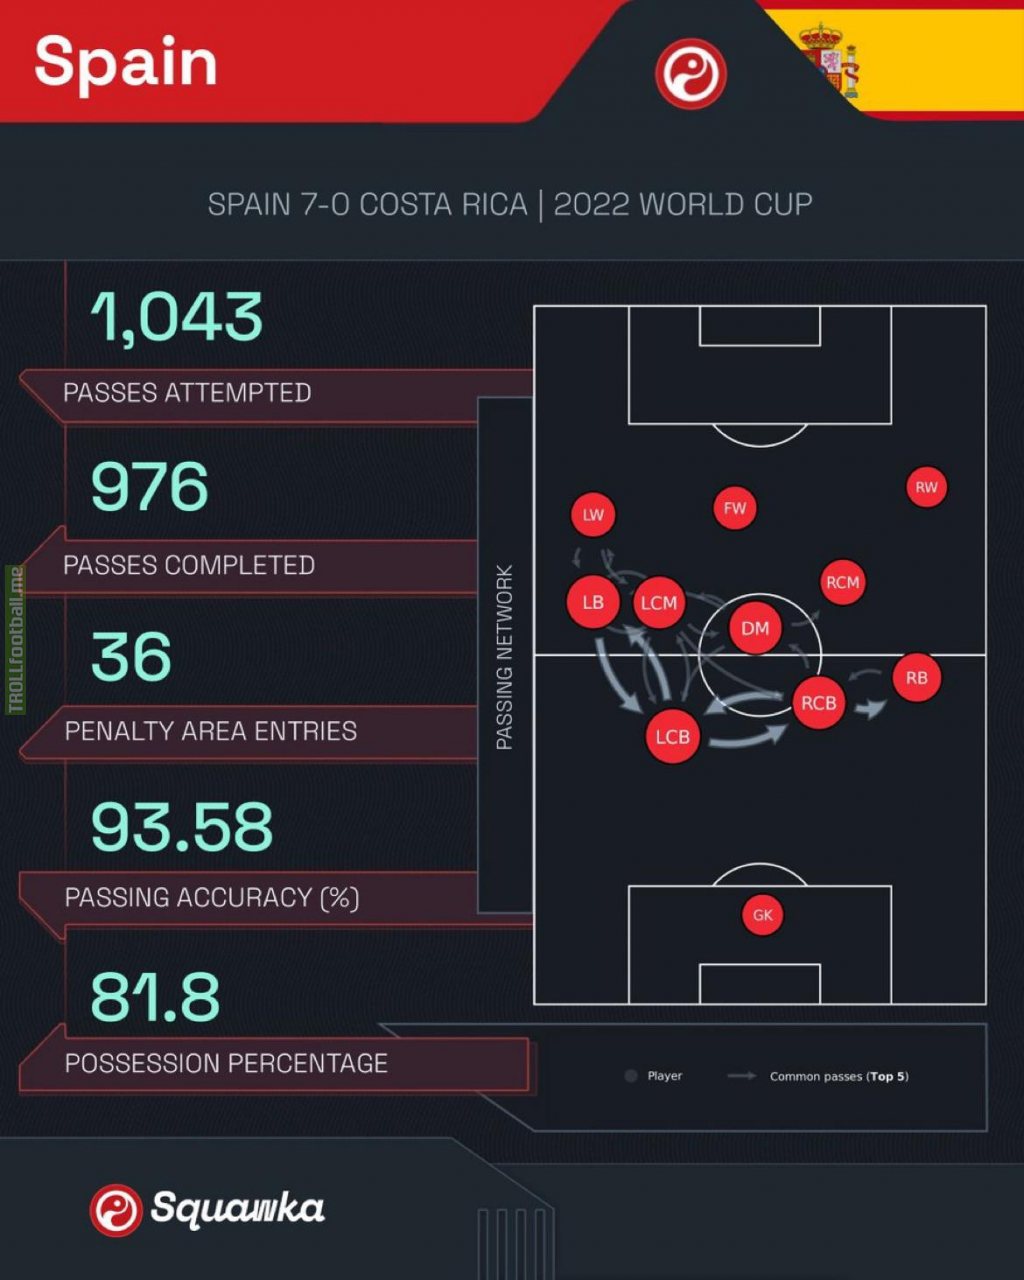 [Squawka] Over 1,000 passes and seven goals scored in a record-breaking World Cup win.